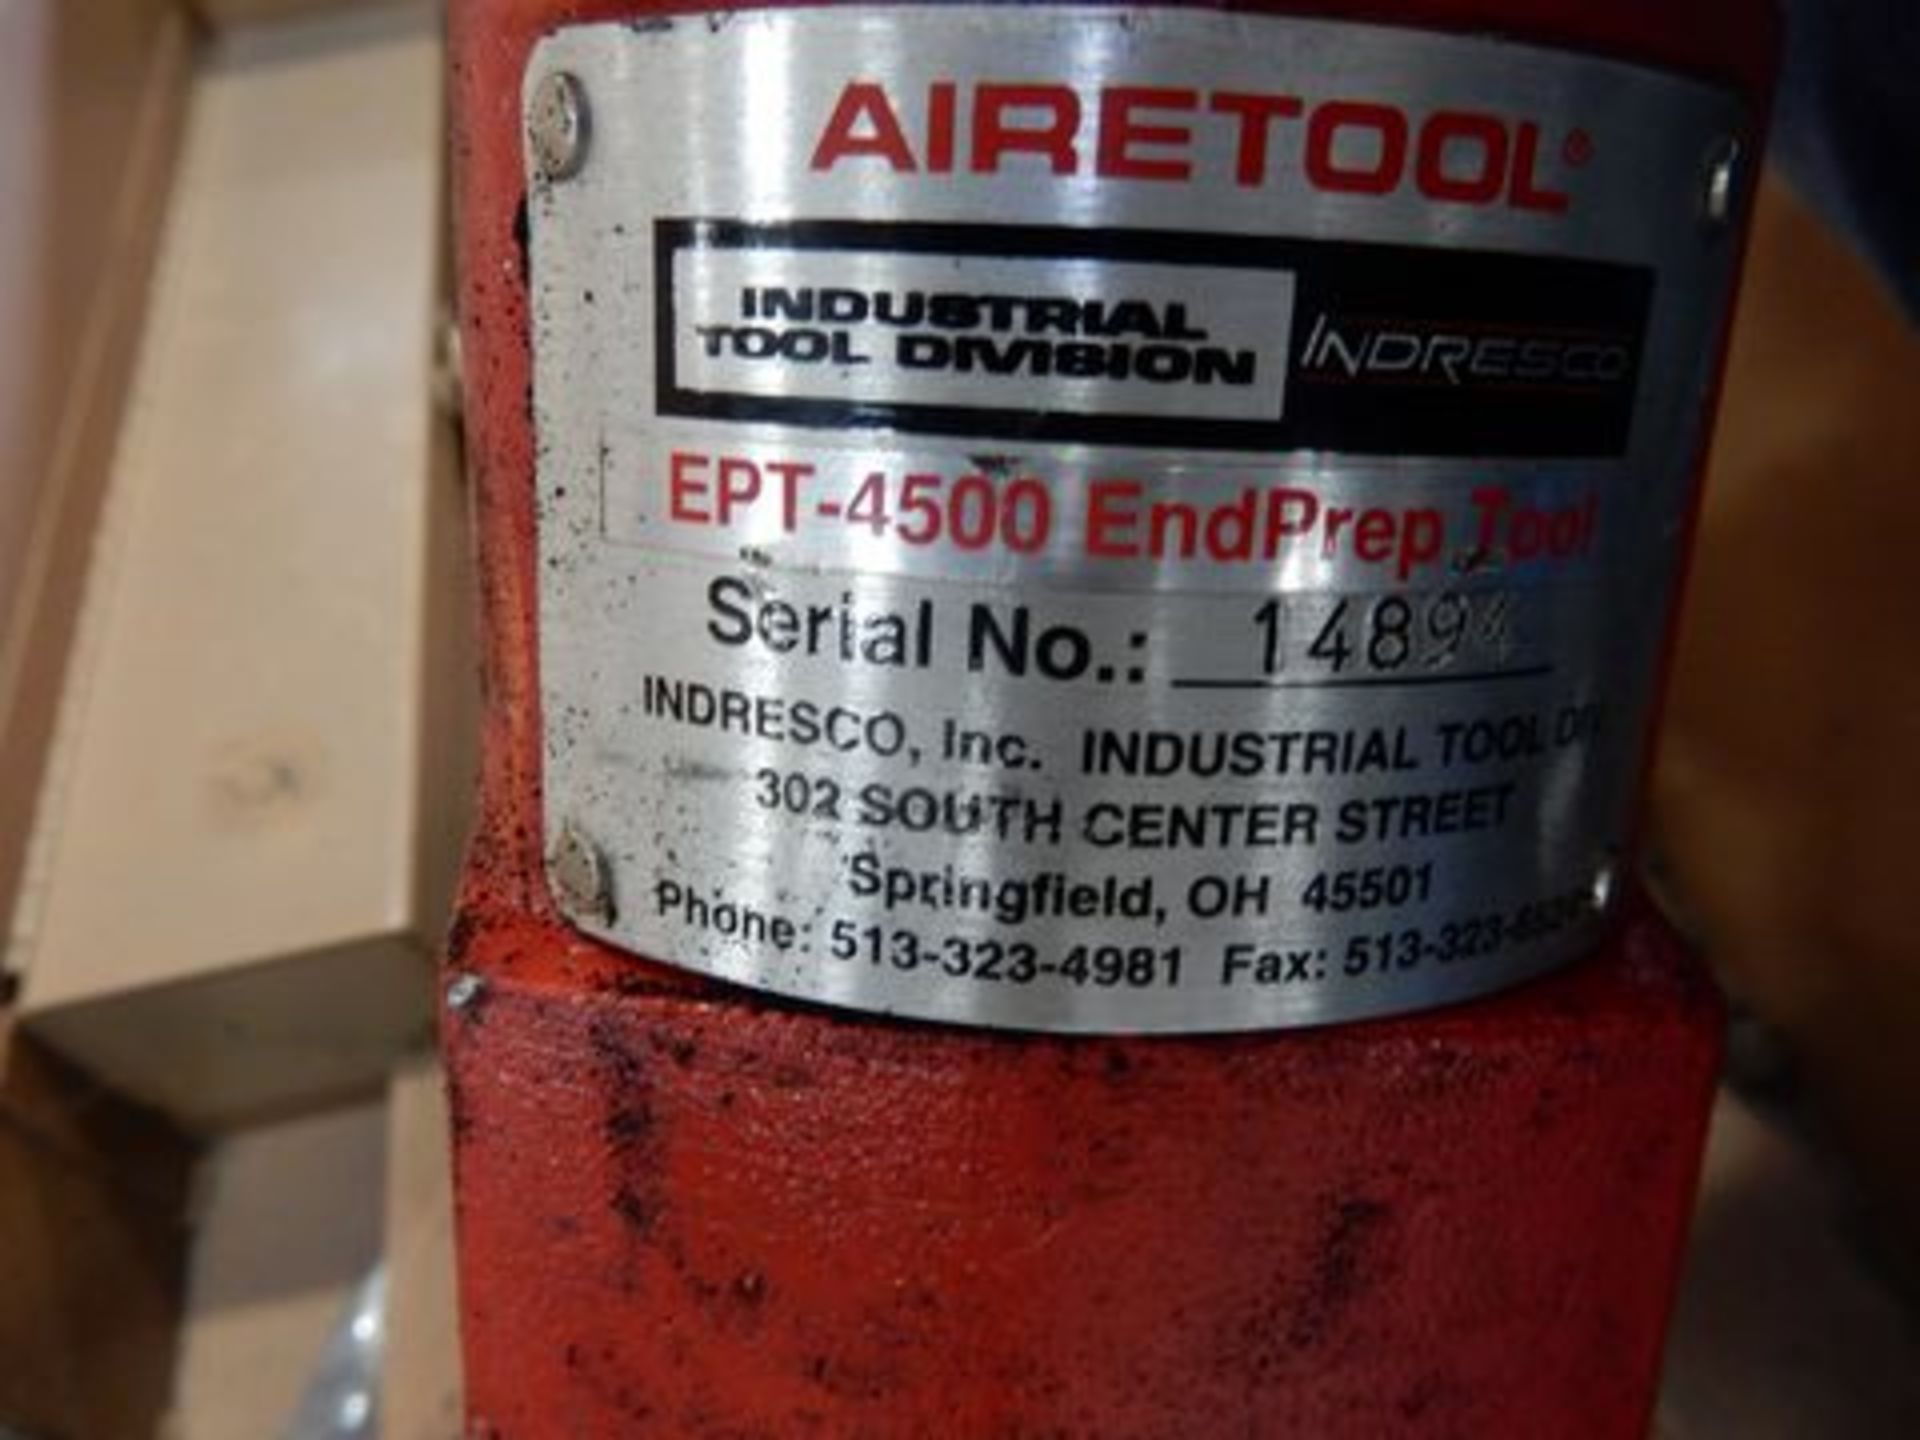 AIRETOOL PORT. PIPE END PREP TOOL, M# EPT-4500, S/N 14894, W/CASE - Image 3 of 4